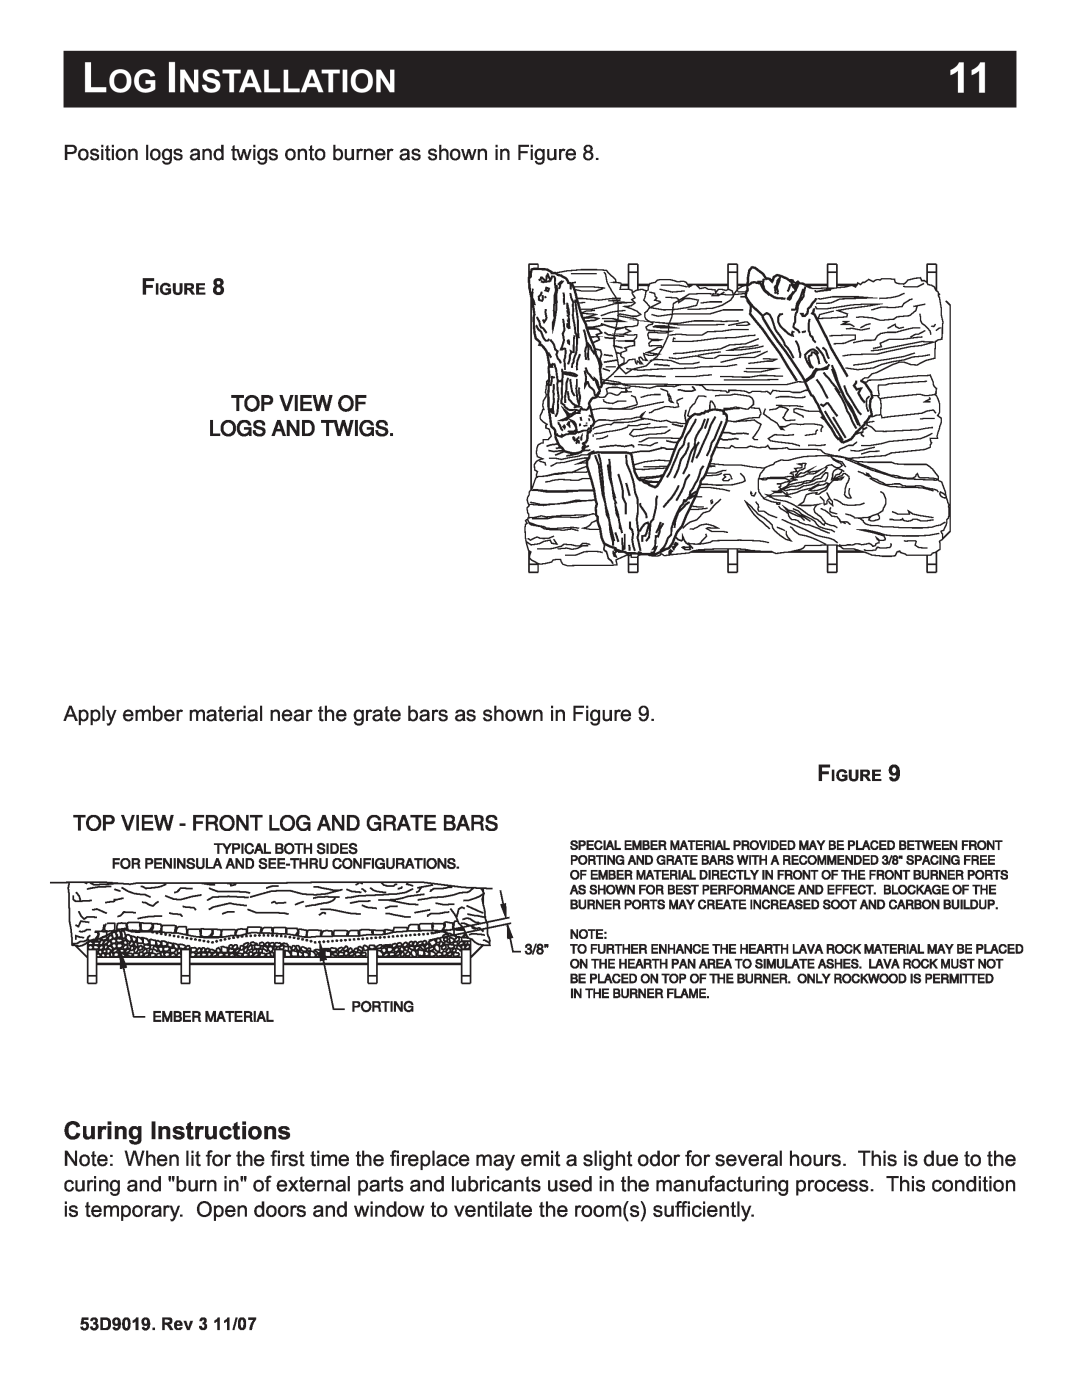 Monessen Hearth DESIGNER SERIES manual Log Installation, Curing Instructions, Top View Of Logs And Twigs 